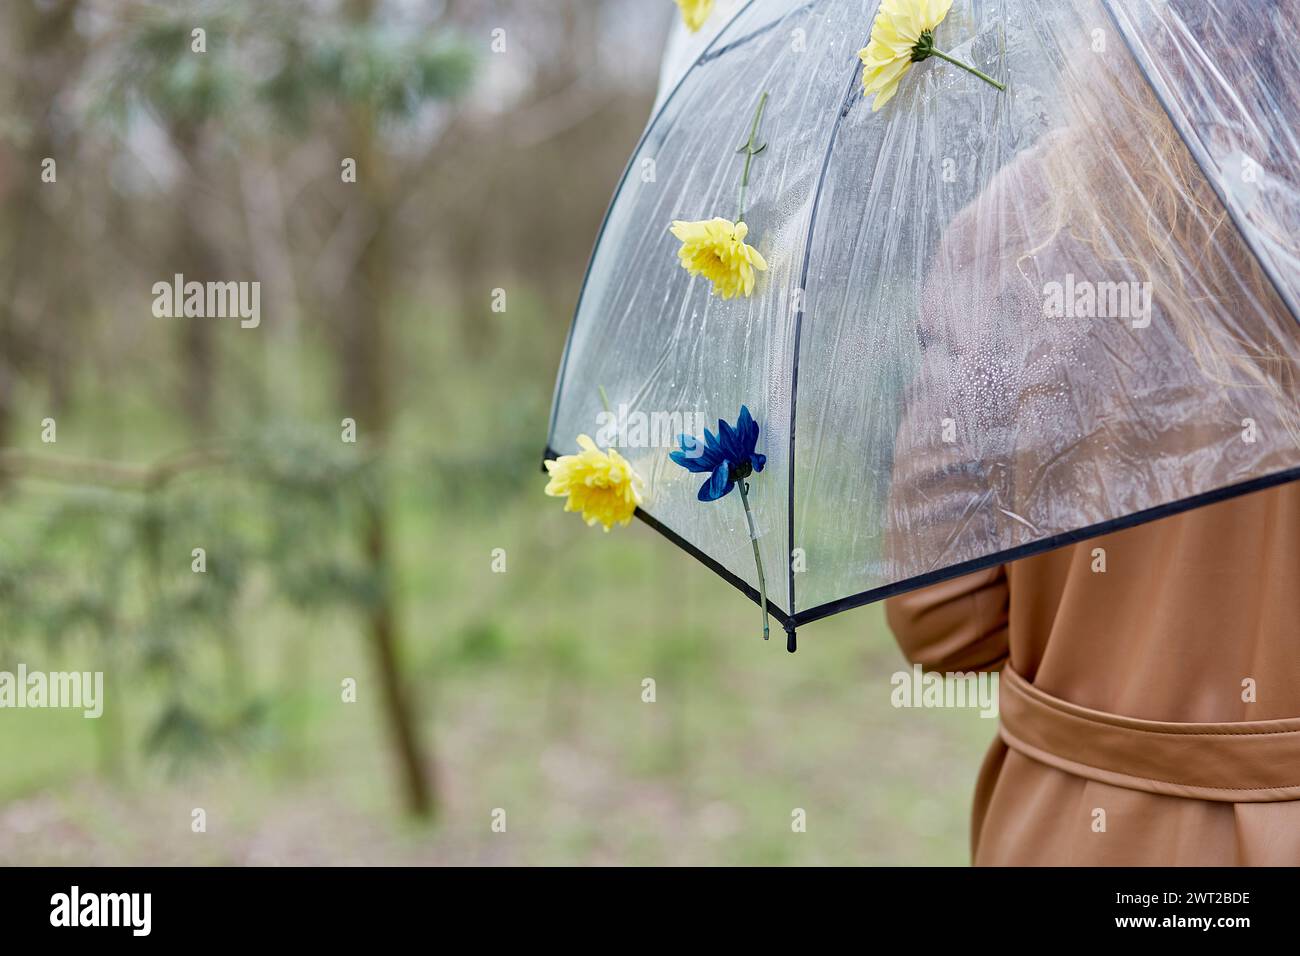 Woman under permanent umbrella adorned with fresh flowers. Symbol for spring fashion and rainwear collections. AI Illustration Stock Photo